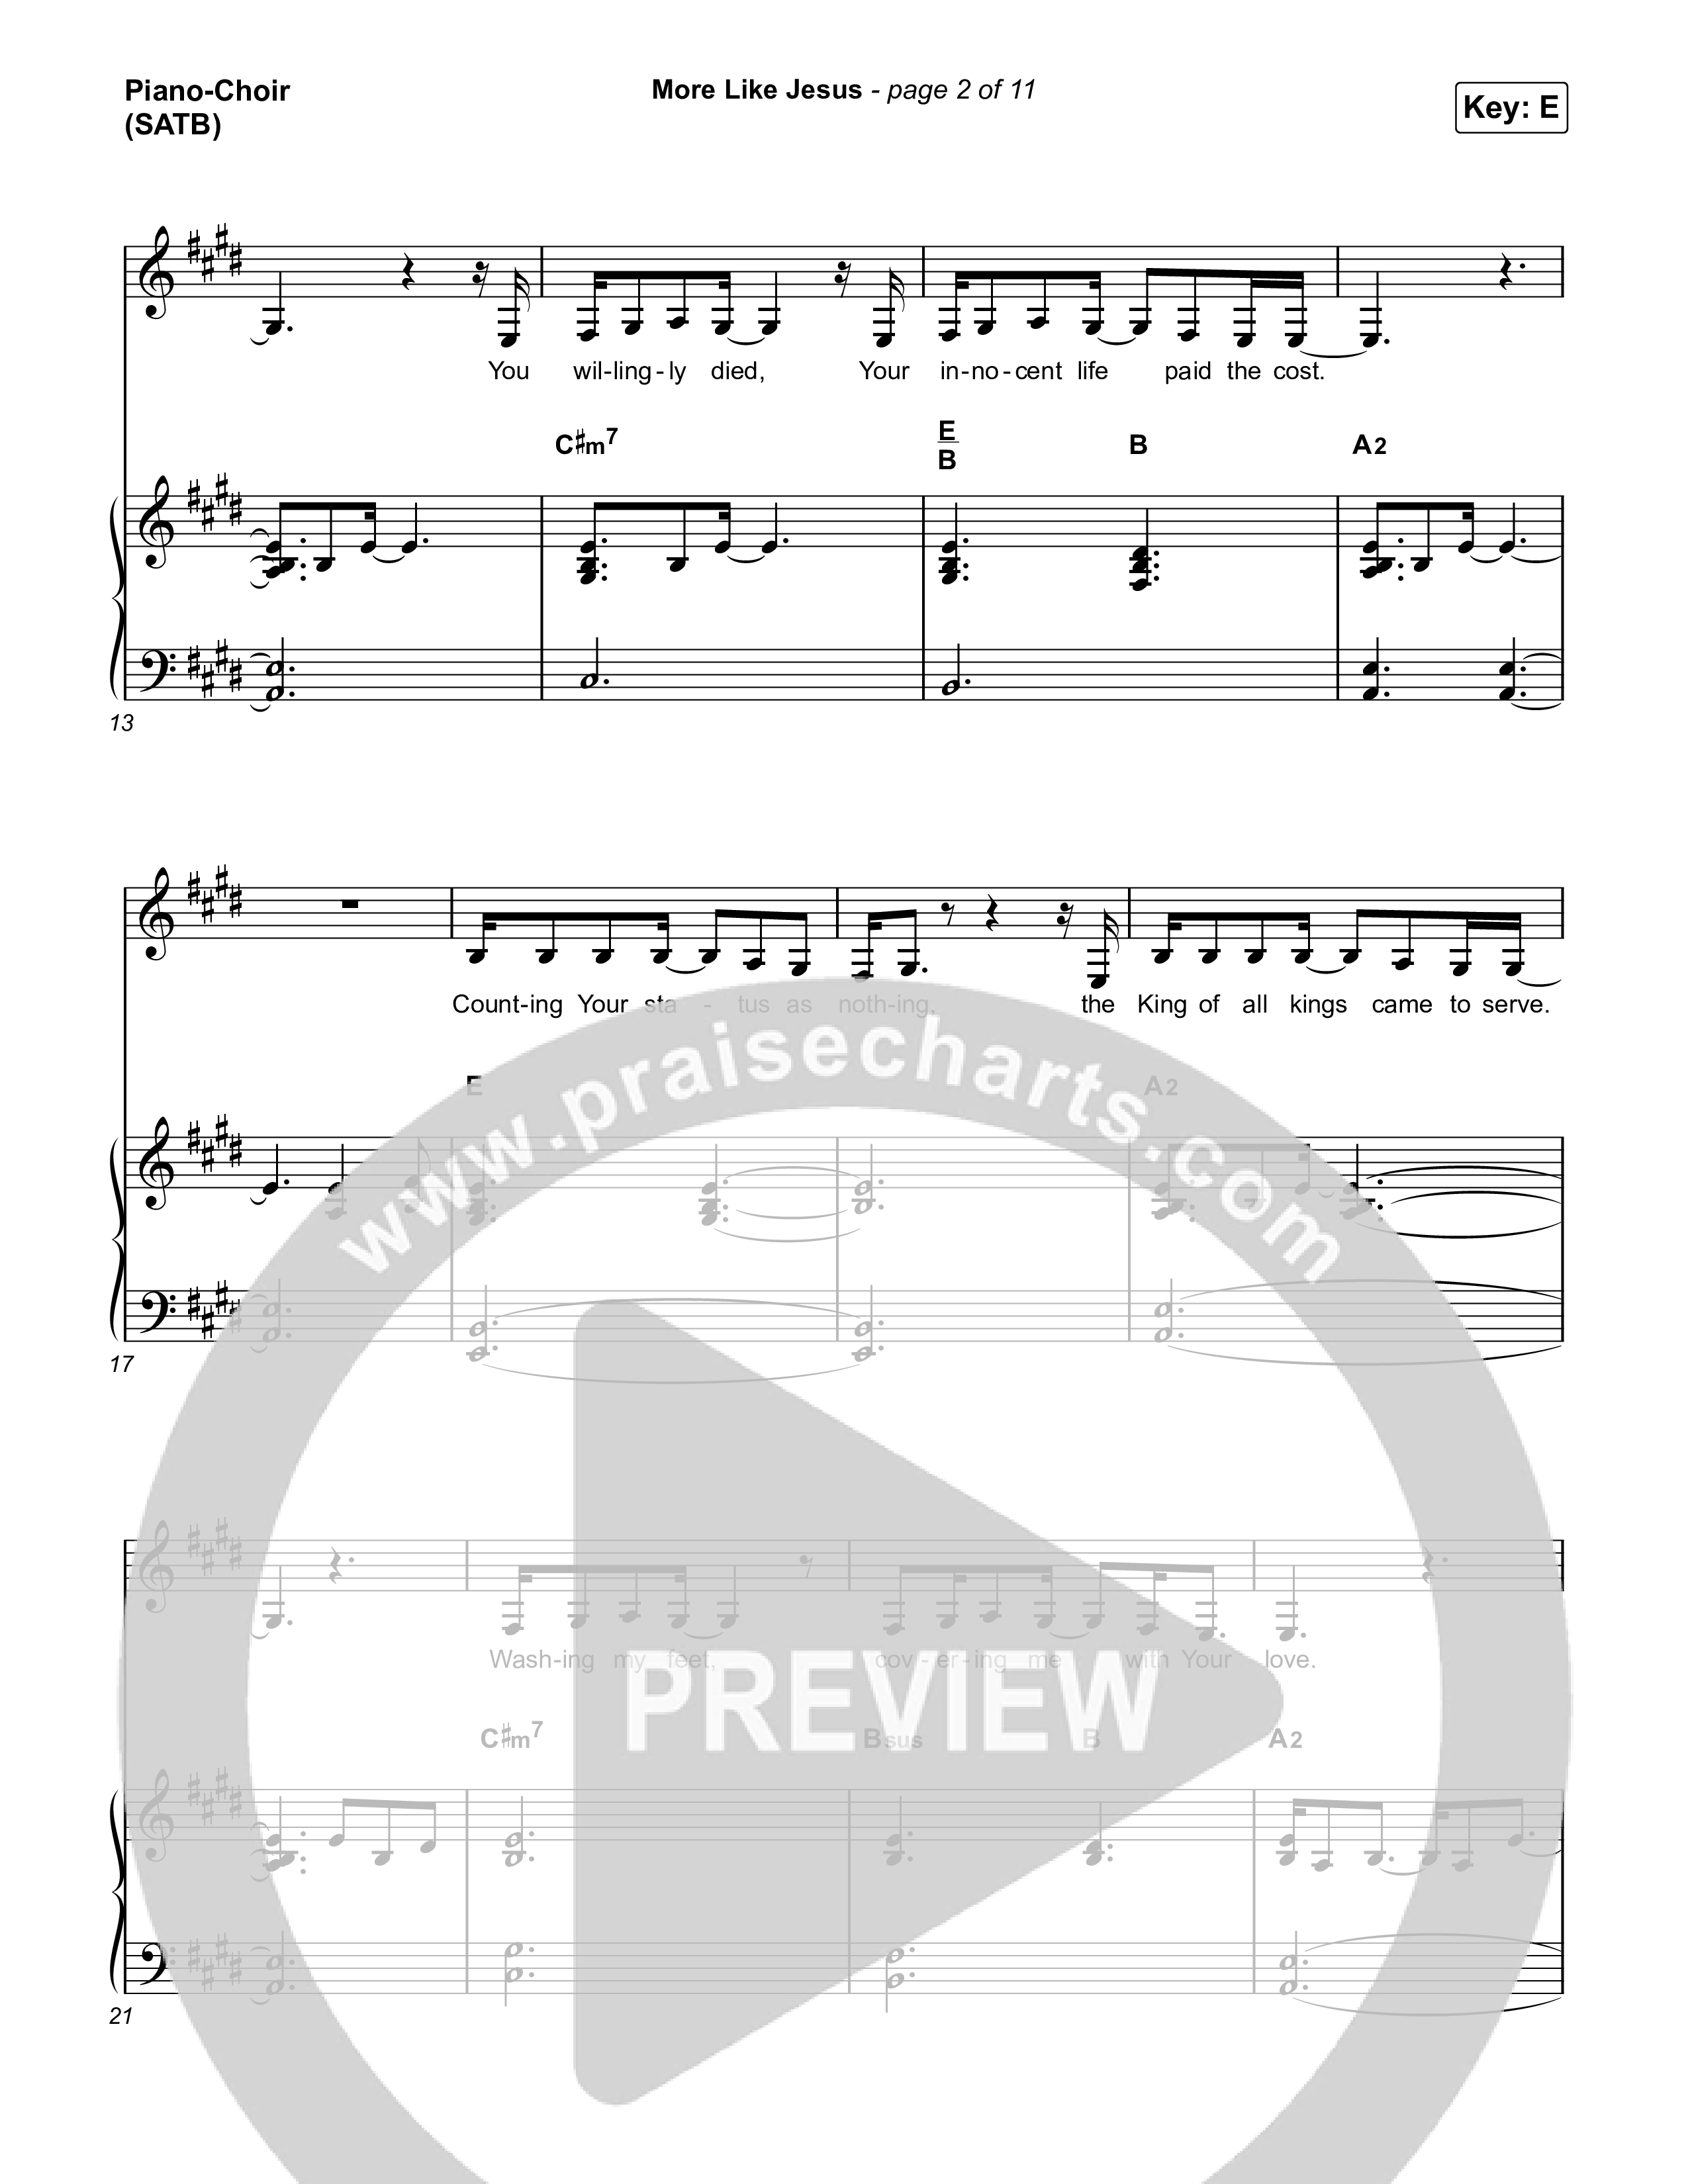 More Like Jesus Piano/Vocal (SATB) (The Worship Initiative / Davy Flowers)